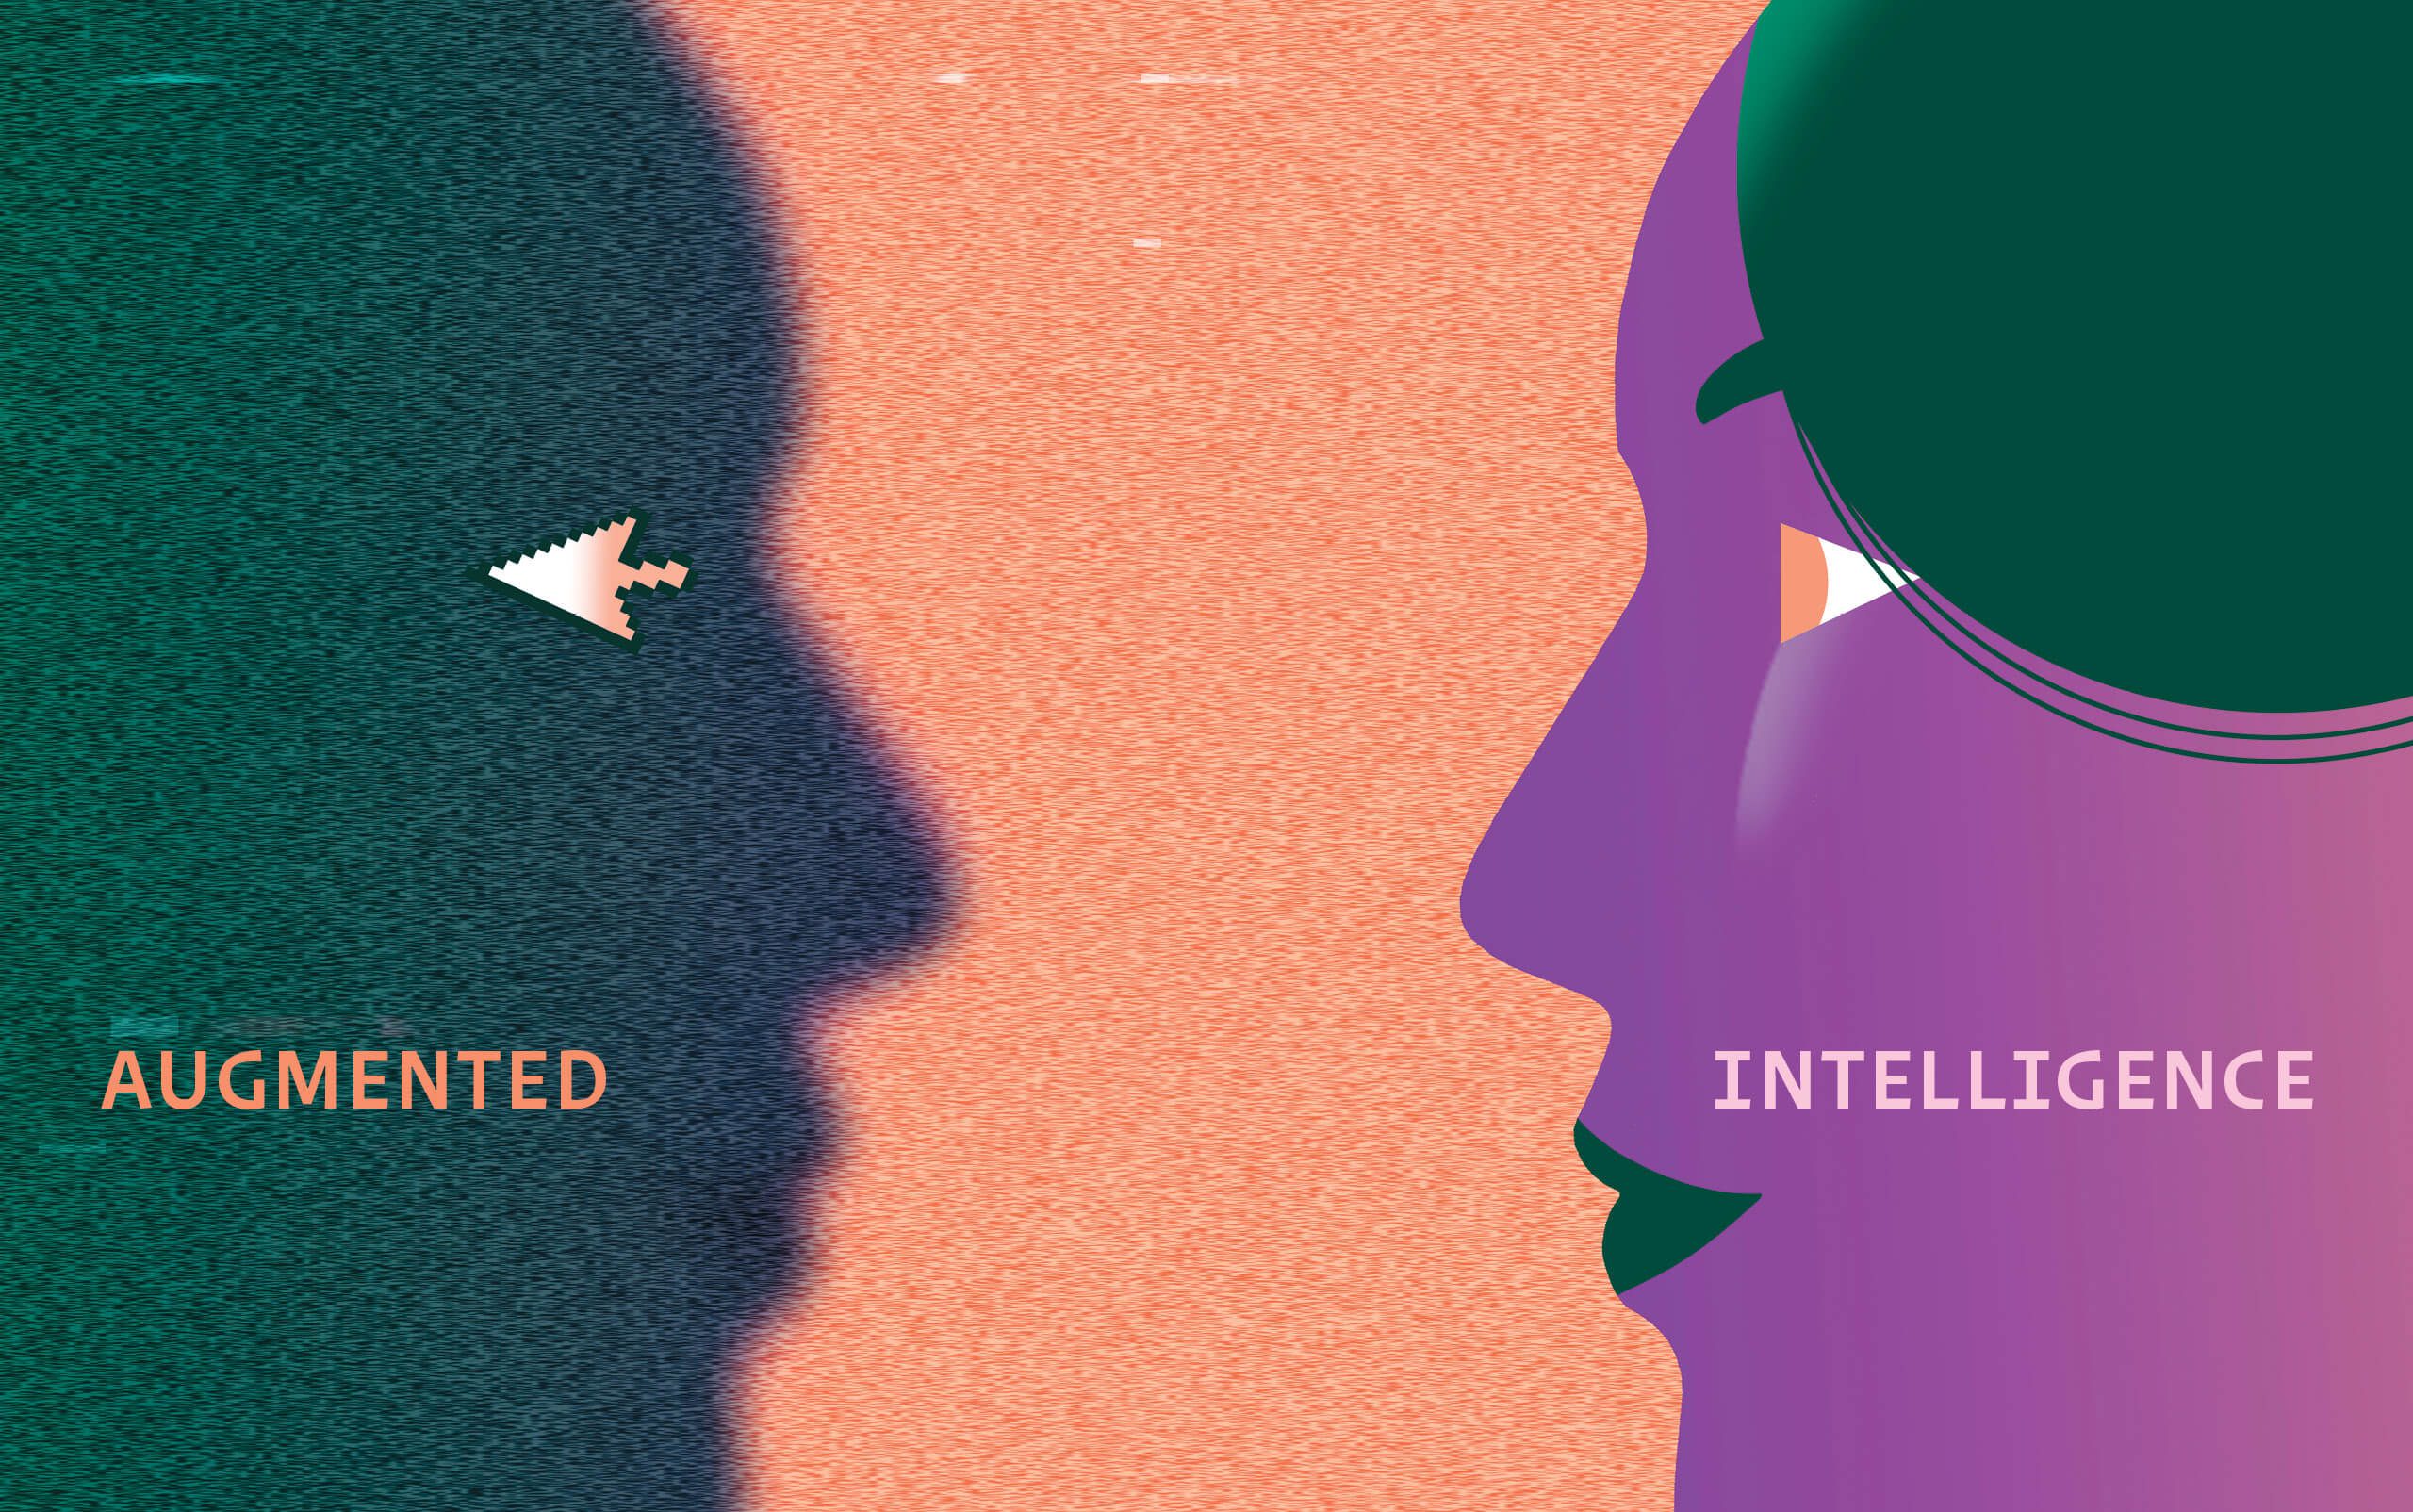 Illustration of two faces facing each other. The one on the right has a real eye. The one on the left has a computer pointer for an eye, indicating it's computer generated. The words Augmented Intelligence are overlaid onto the faces.